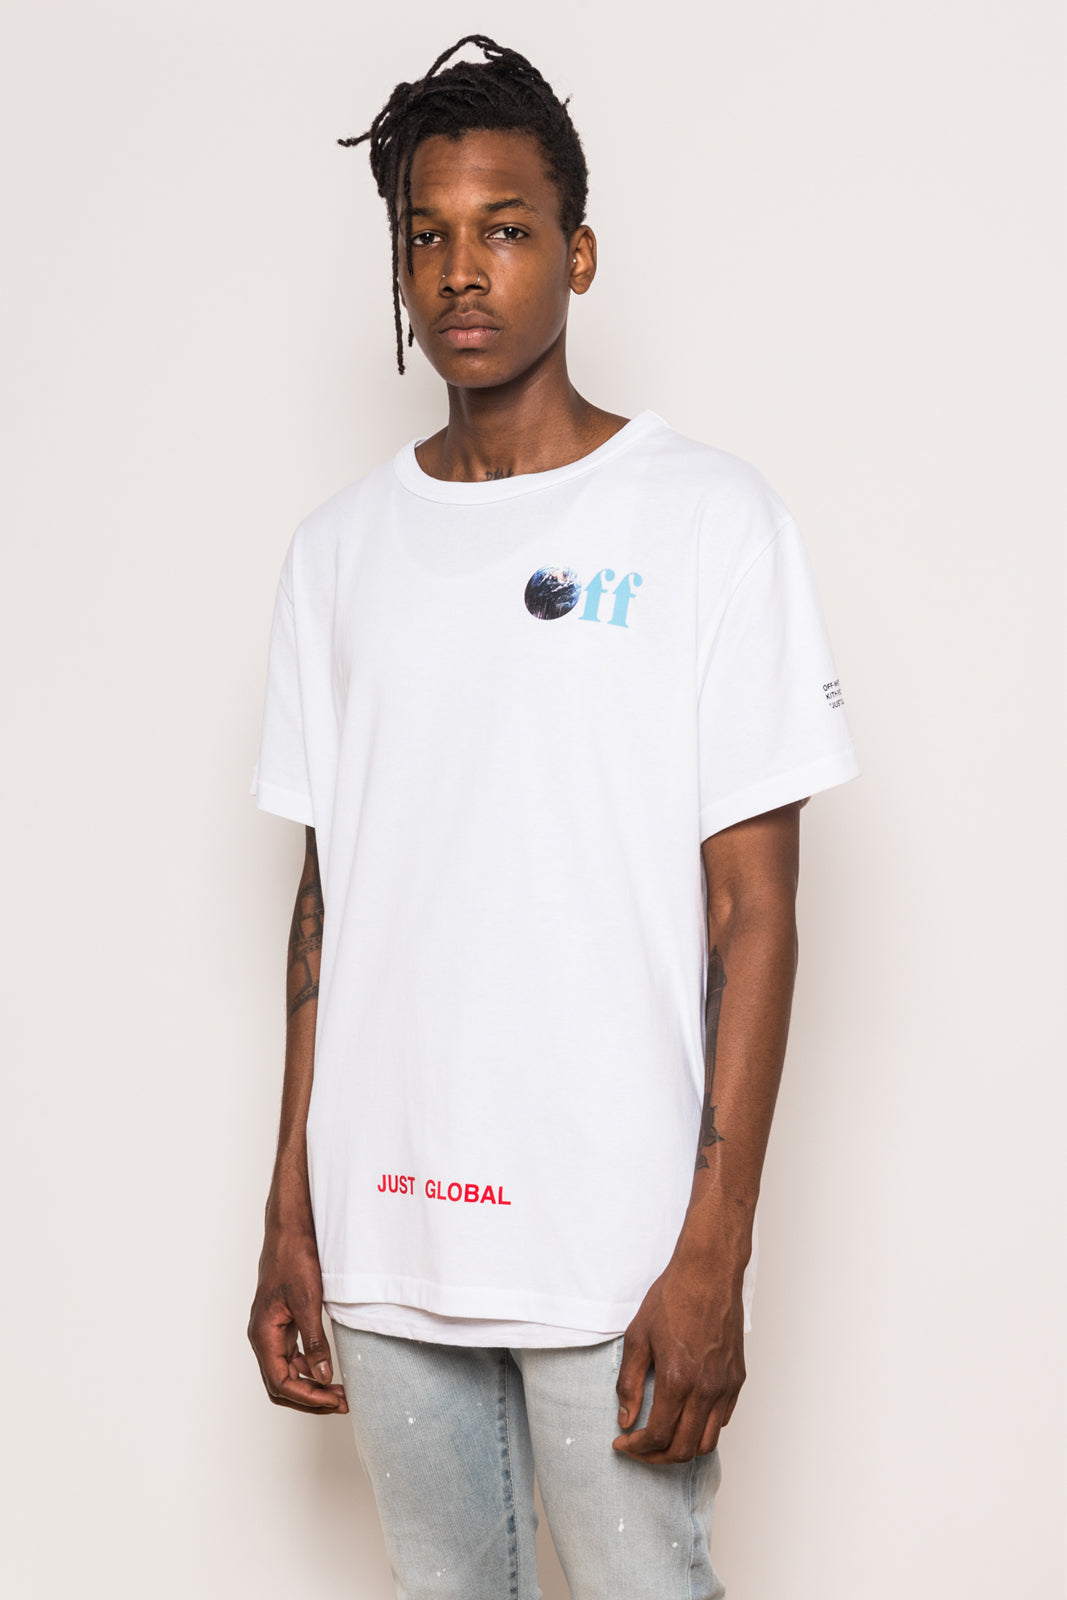 Kith x Off-White Just Global Capsule